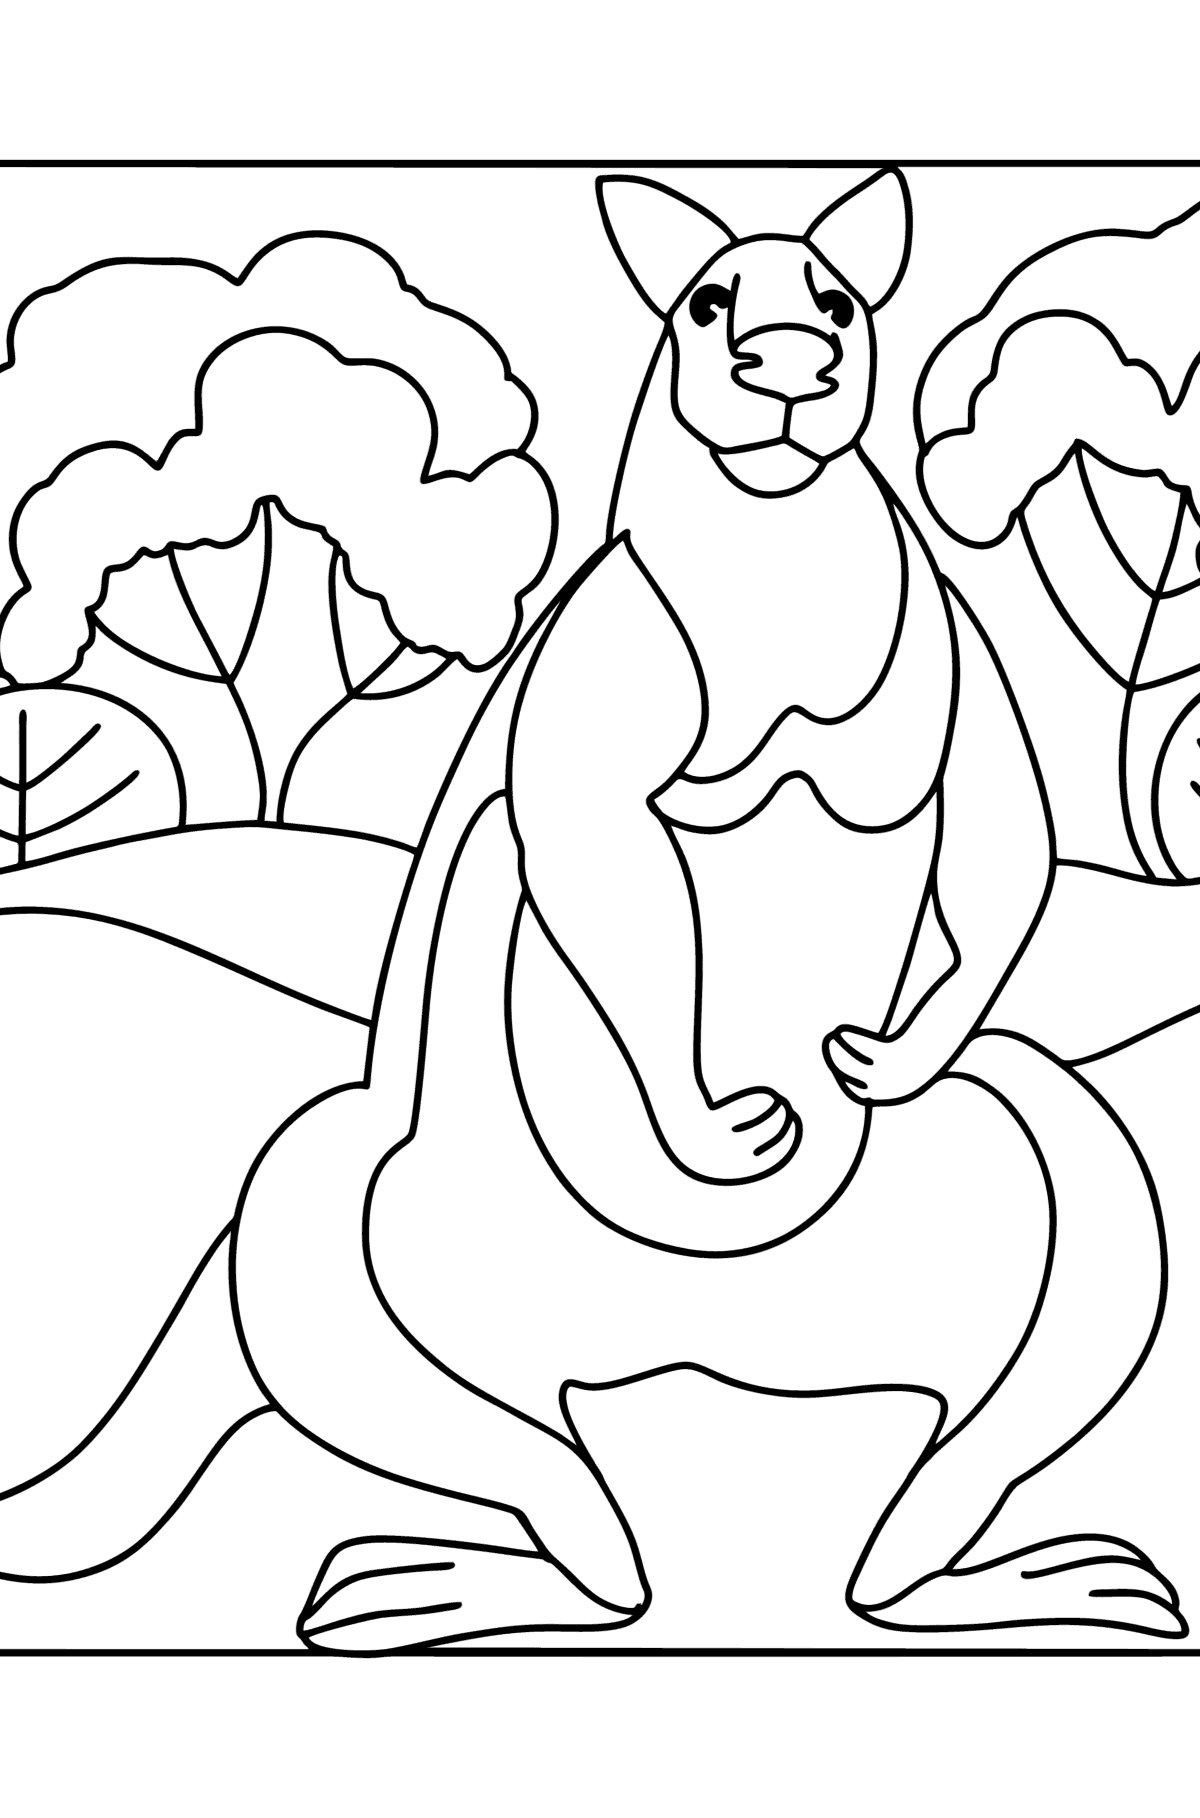 Giant Kangaroo coloring page - Coloring Pages for Kids